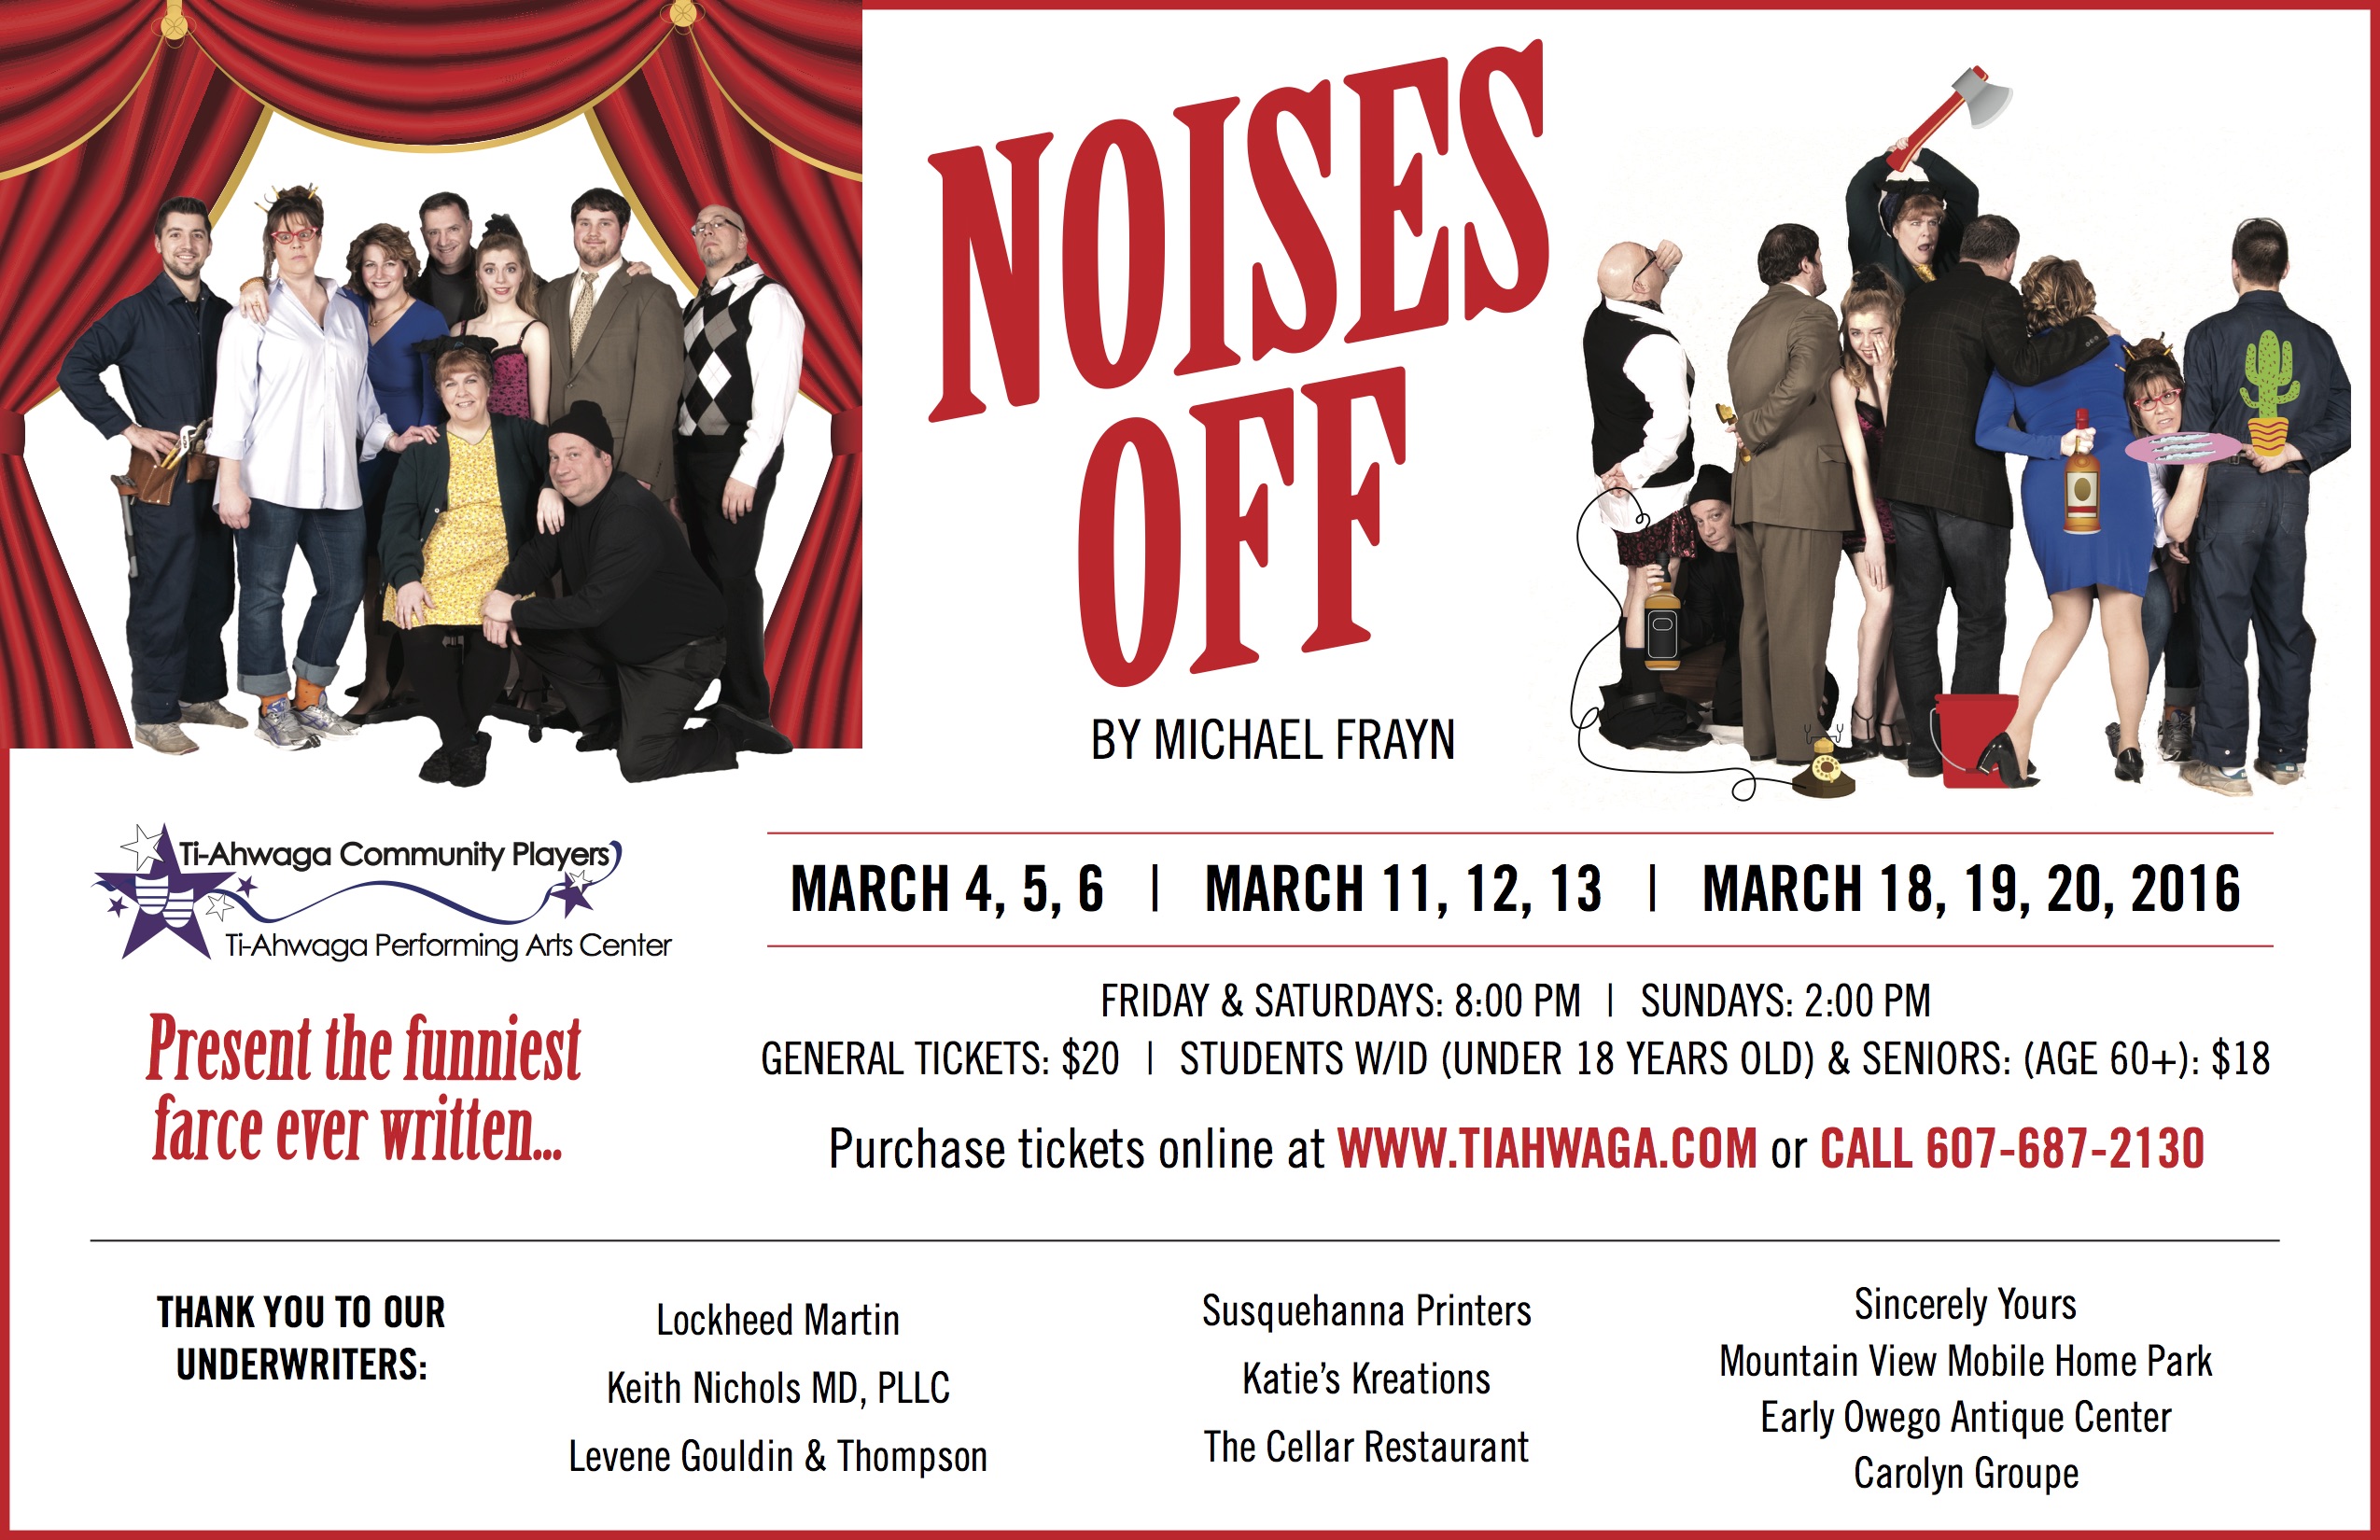 ‘Noises Off’ returns to the Ti-Ahwaga stage